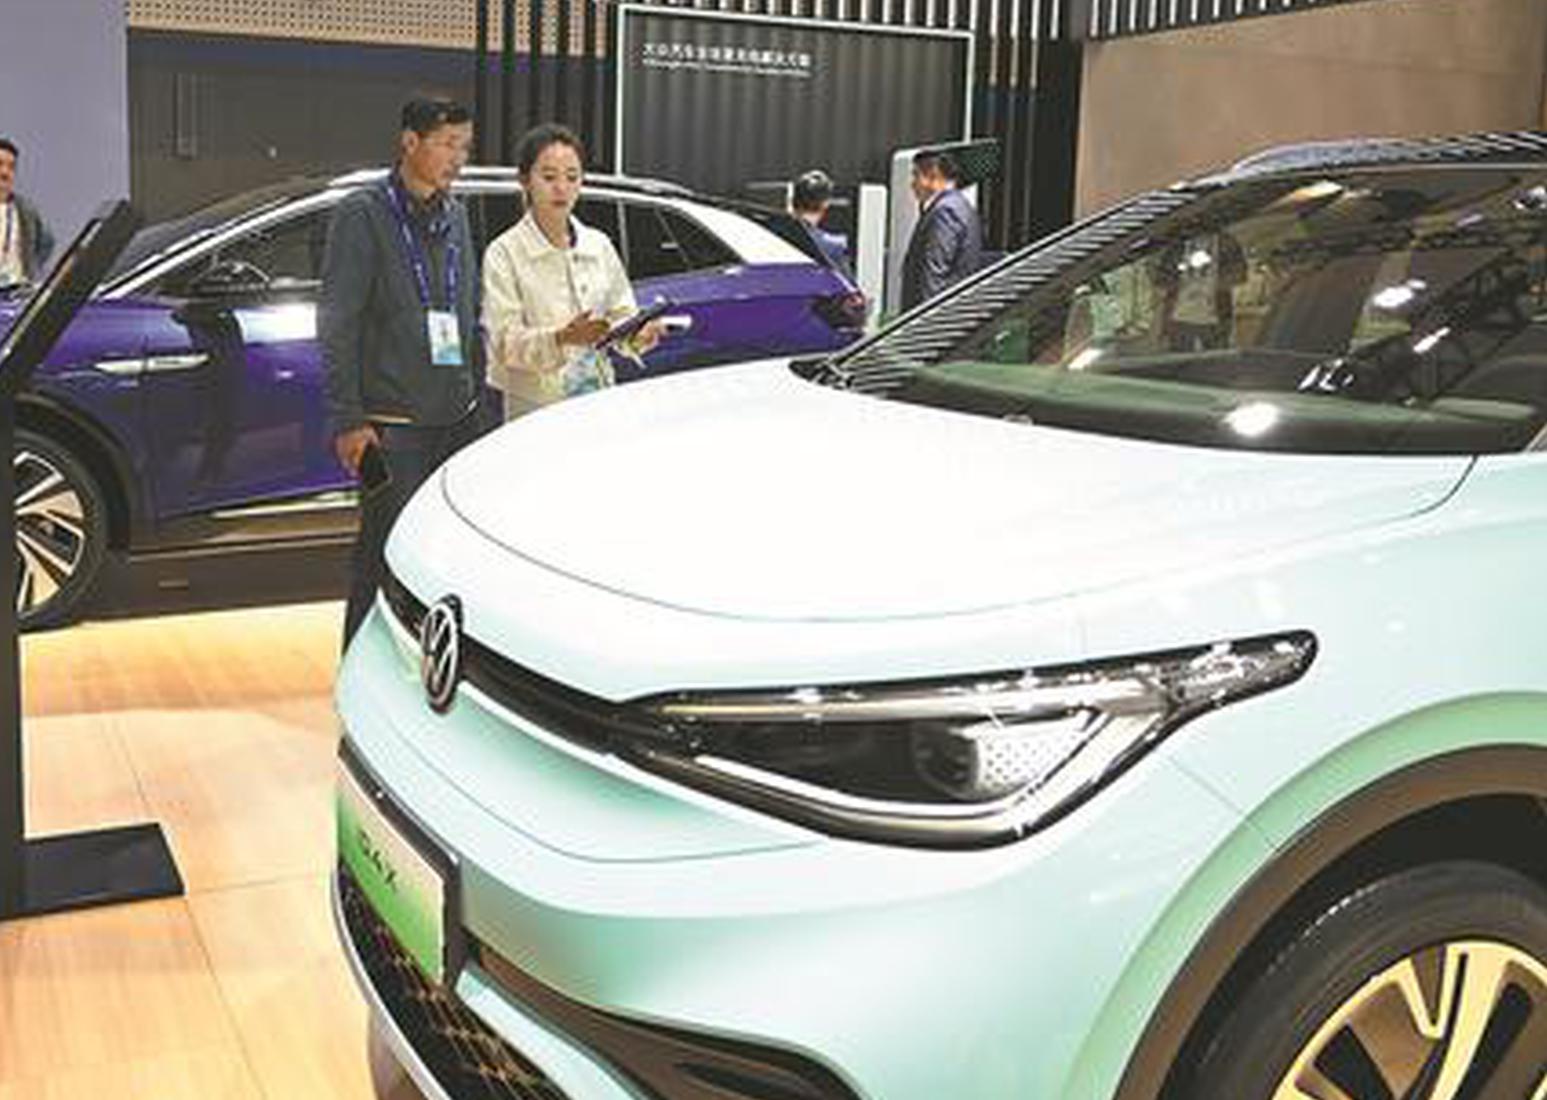 Hainan takes lead in green auto sector